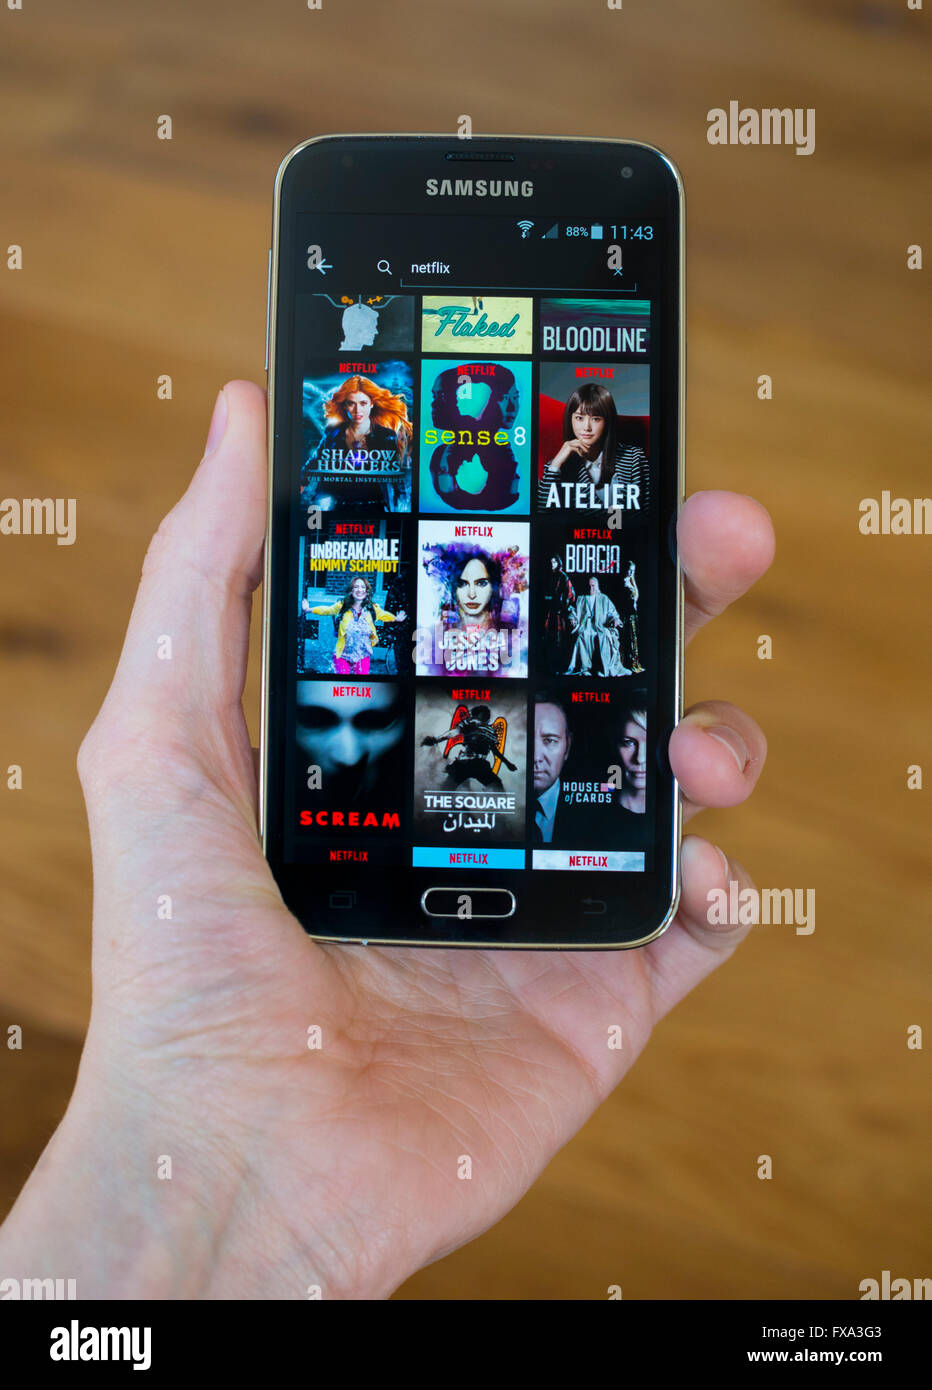 A hand holding a Samsung phone with the Netlfix app open, showing original Netflix content. Stock Photo